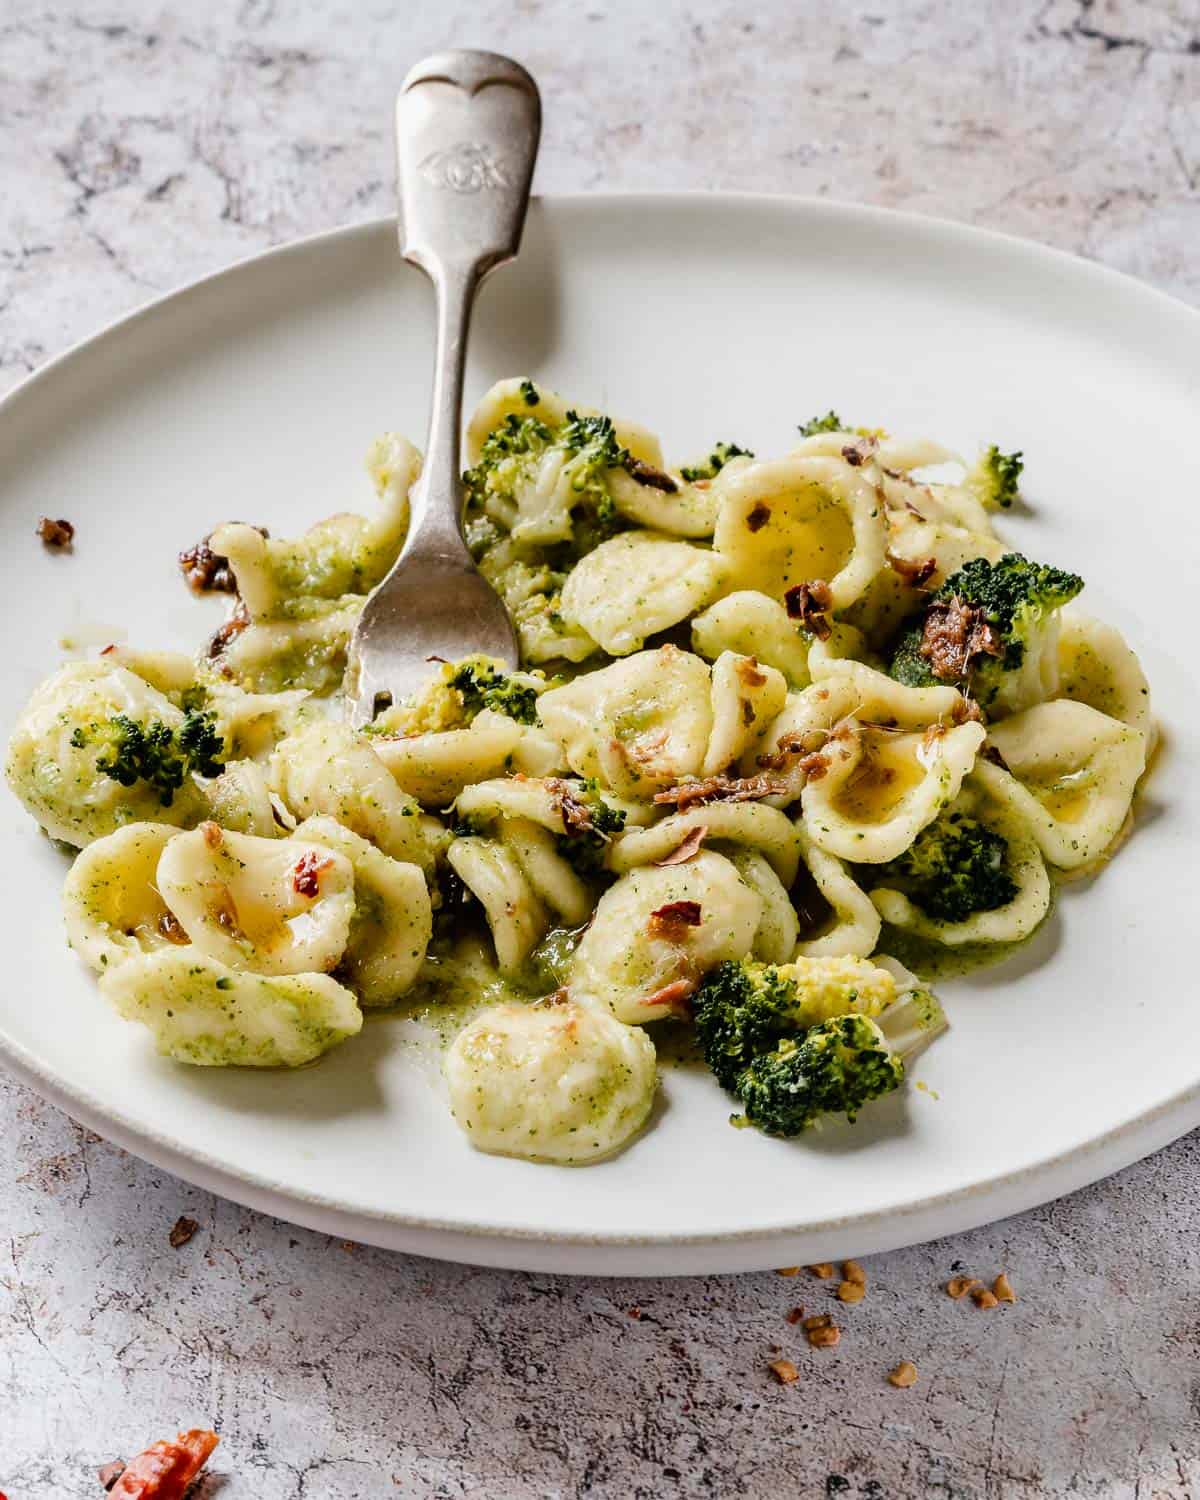 A close up of Broccoli Orecchiette Pasta on a white plate and marble table. The pasta shown a few anchovies on top. There is a fork in the plate